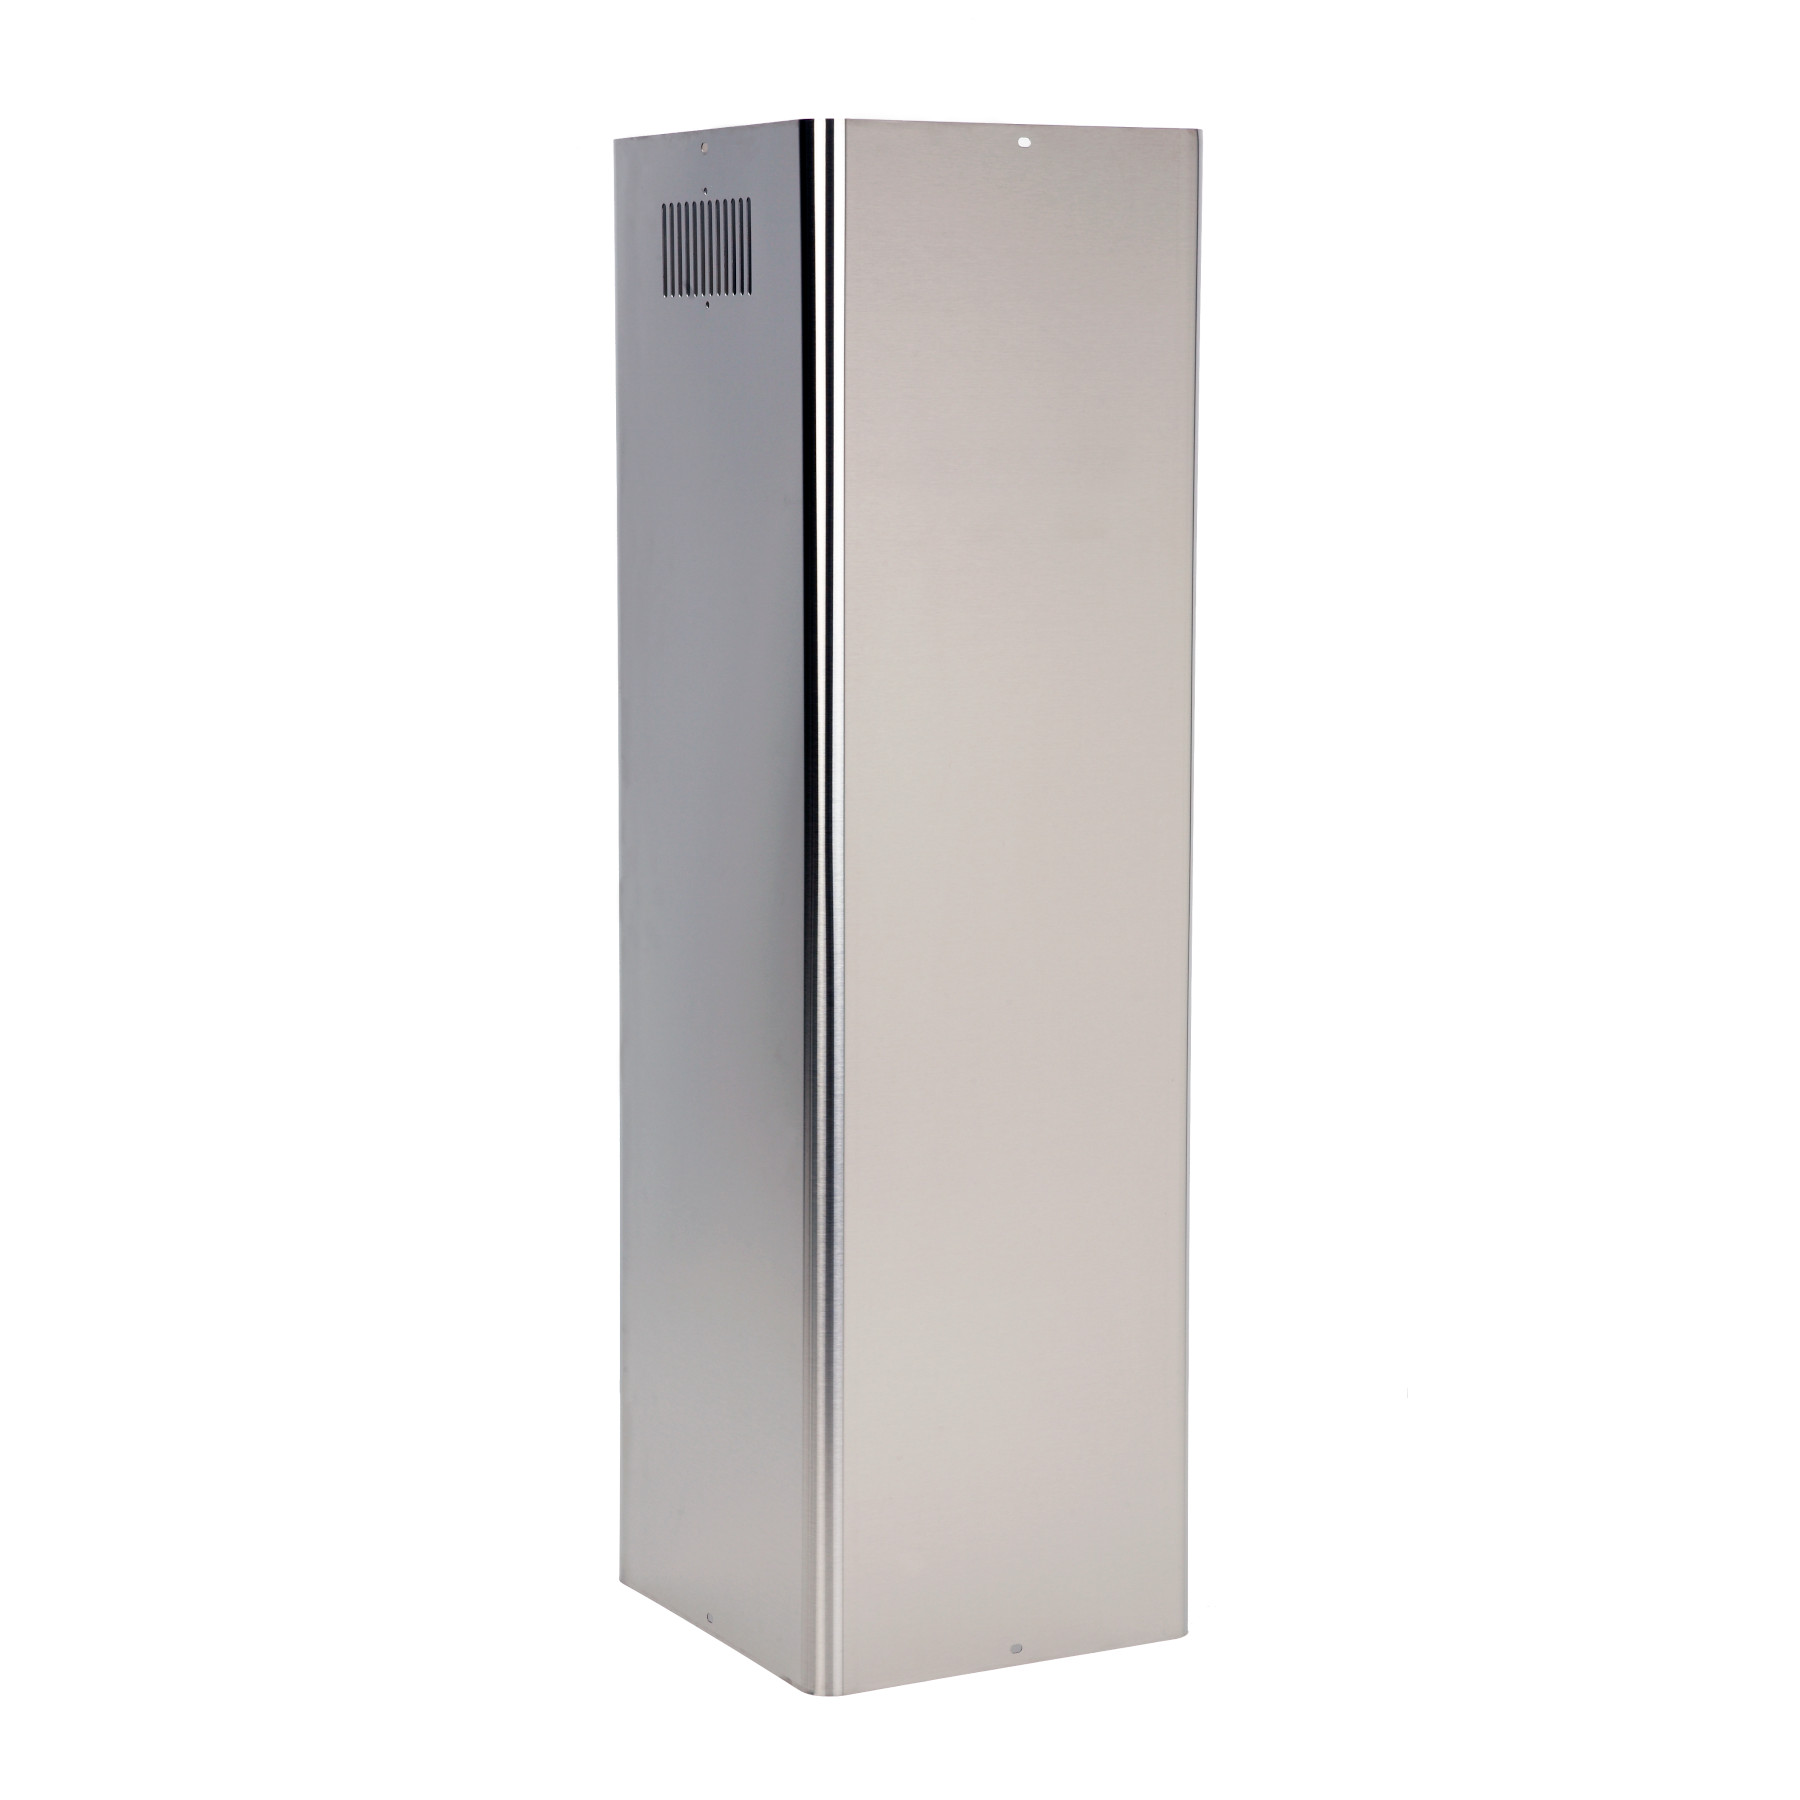 **DISCONTINUED** Optional Non-Ducted Flue Extension for B59 Range Hoods in Stainless Steel